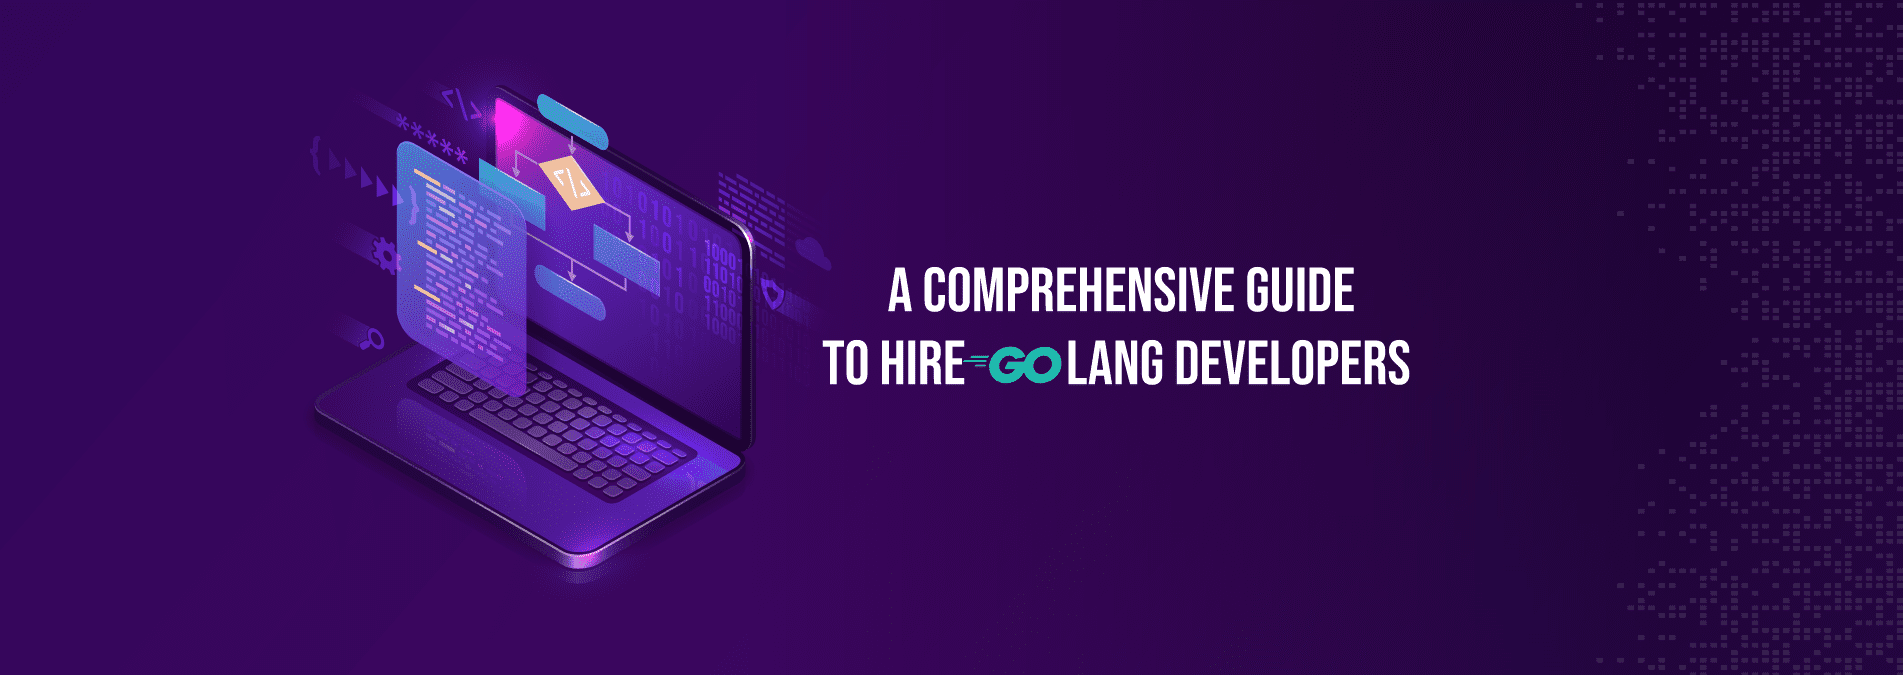 A Comprehensive Guide To Hire Golang Developers - Internet Soft